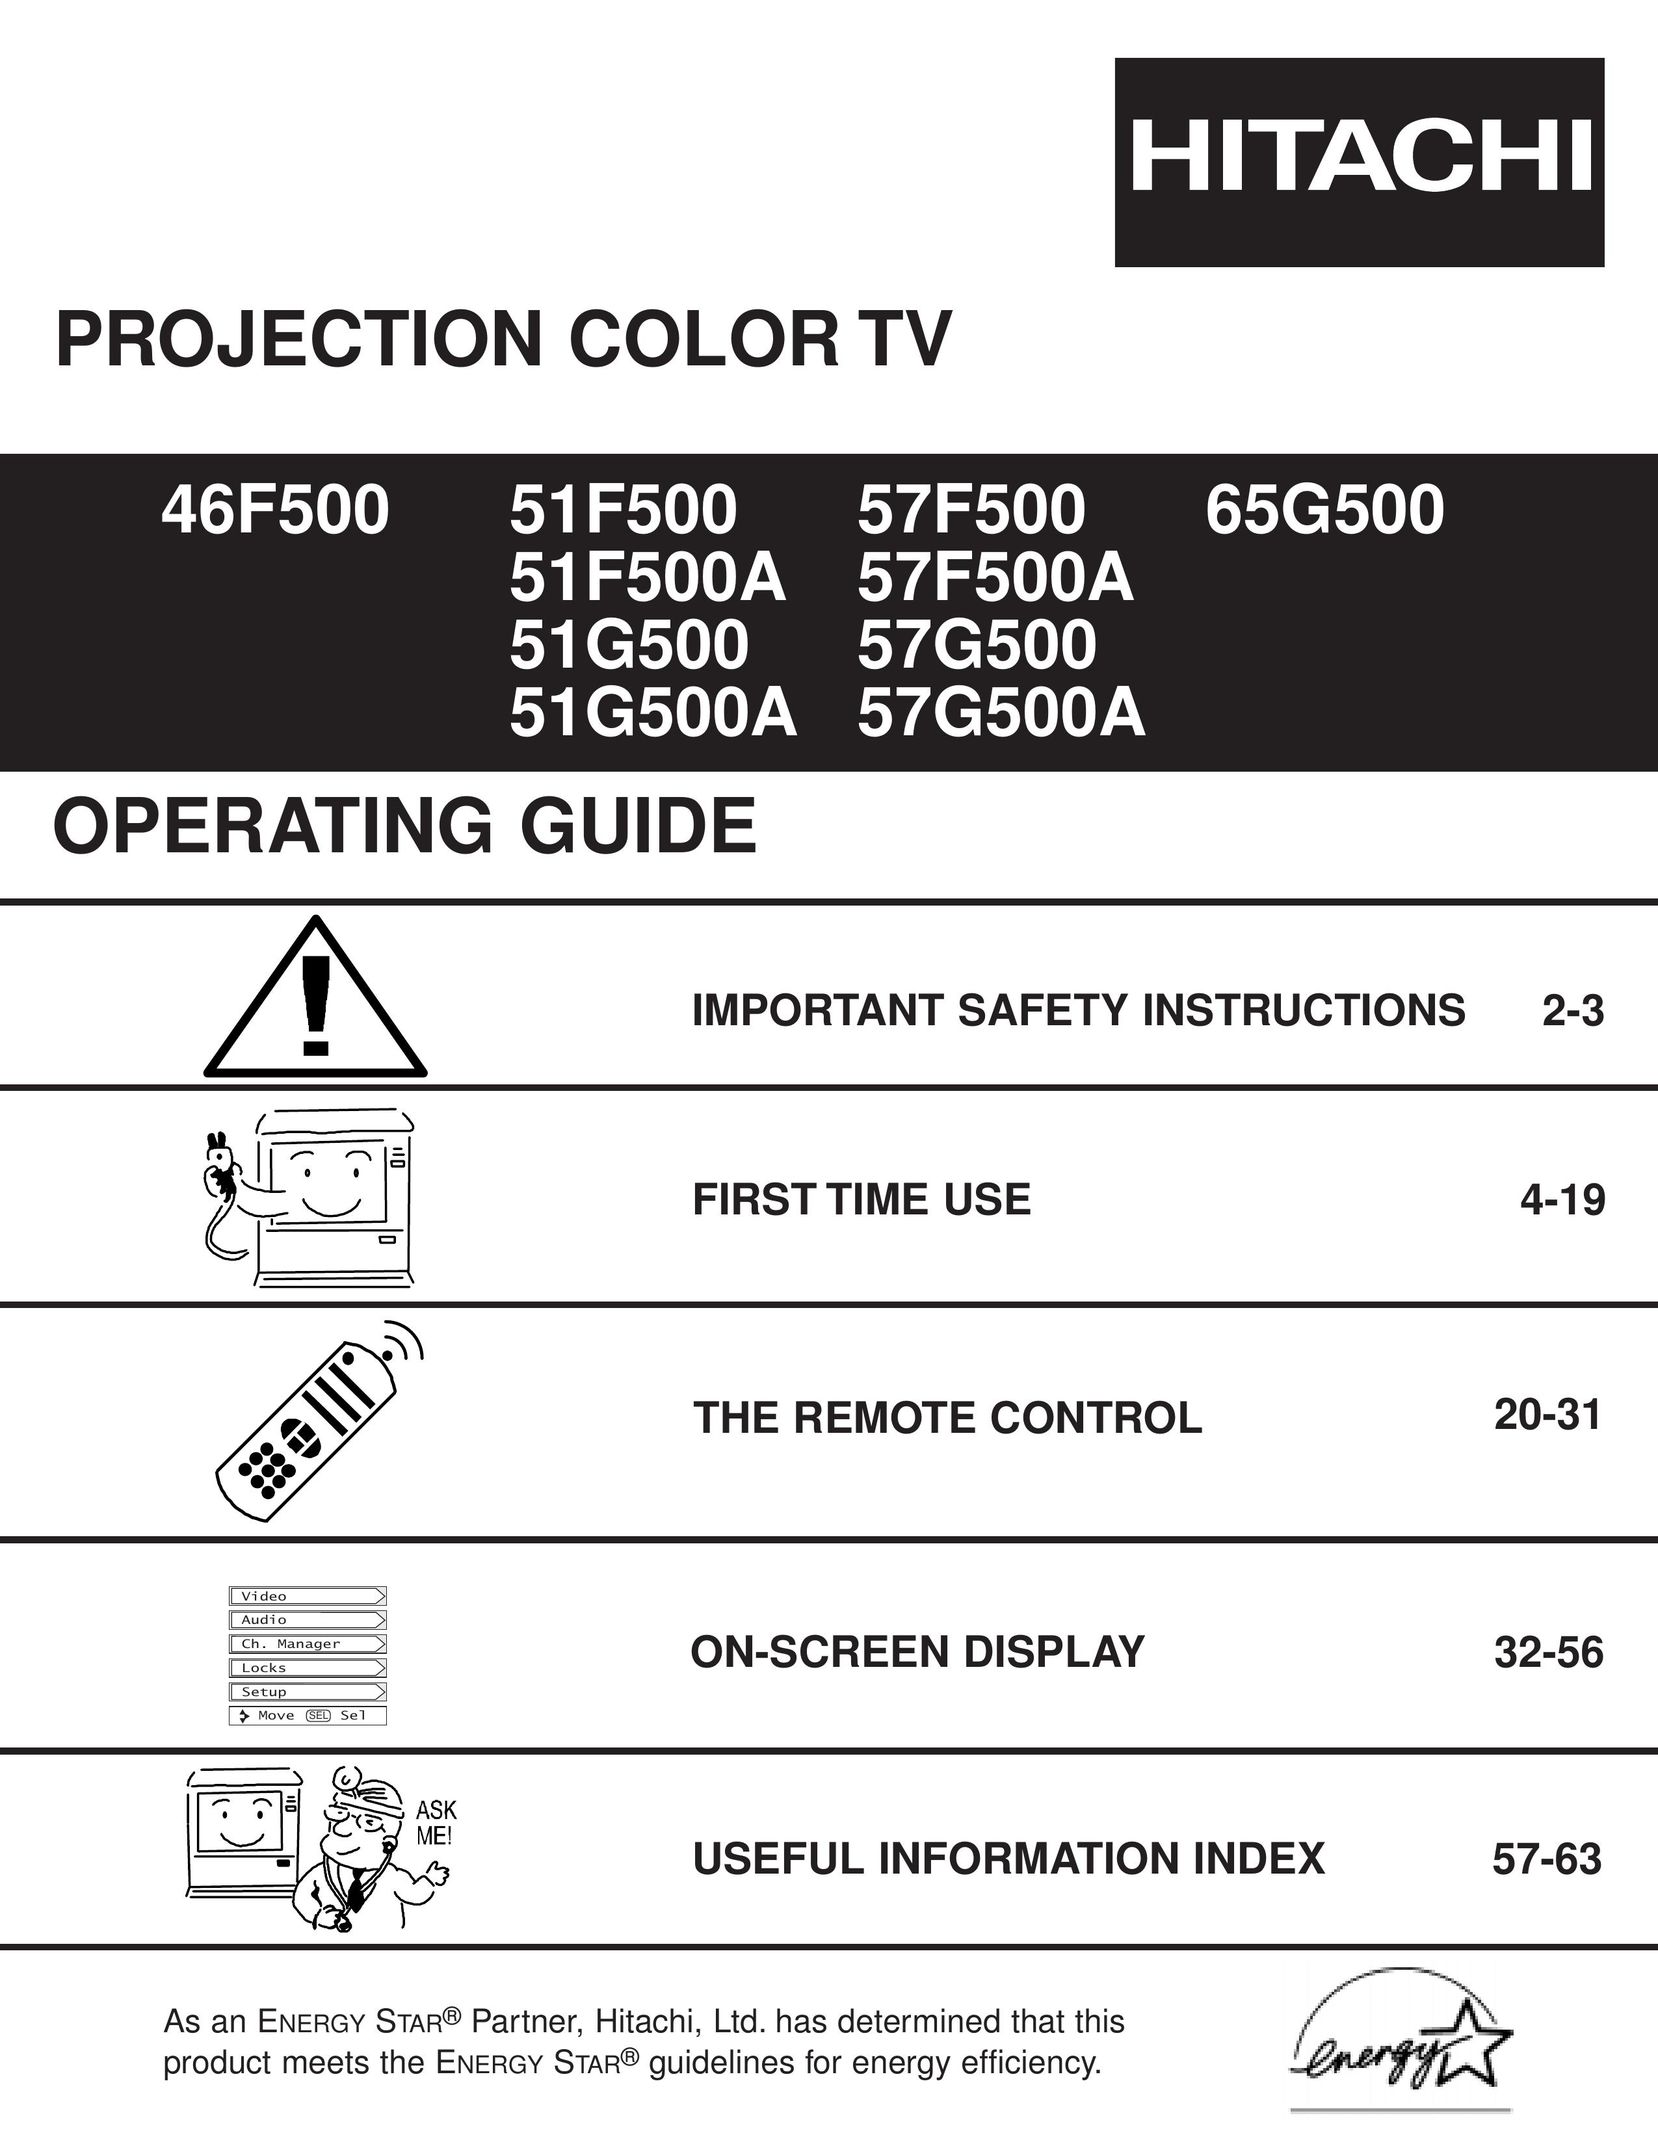 Hitachi 46F500 Projection Television User Manual